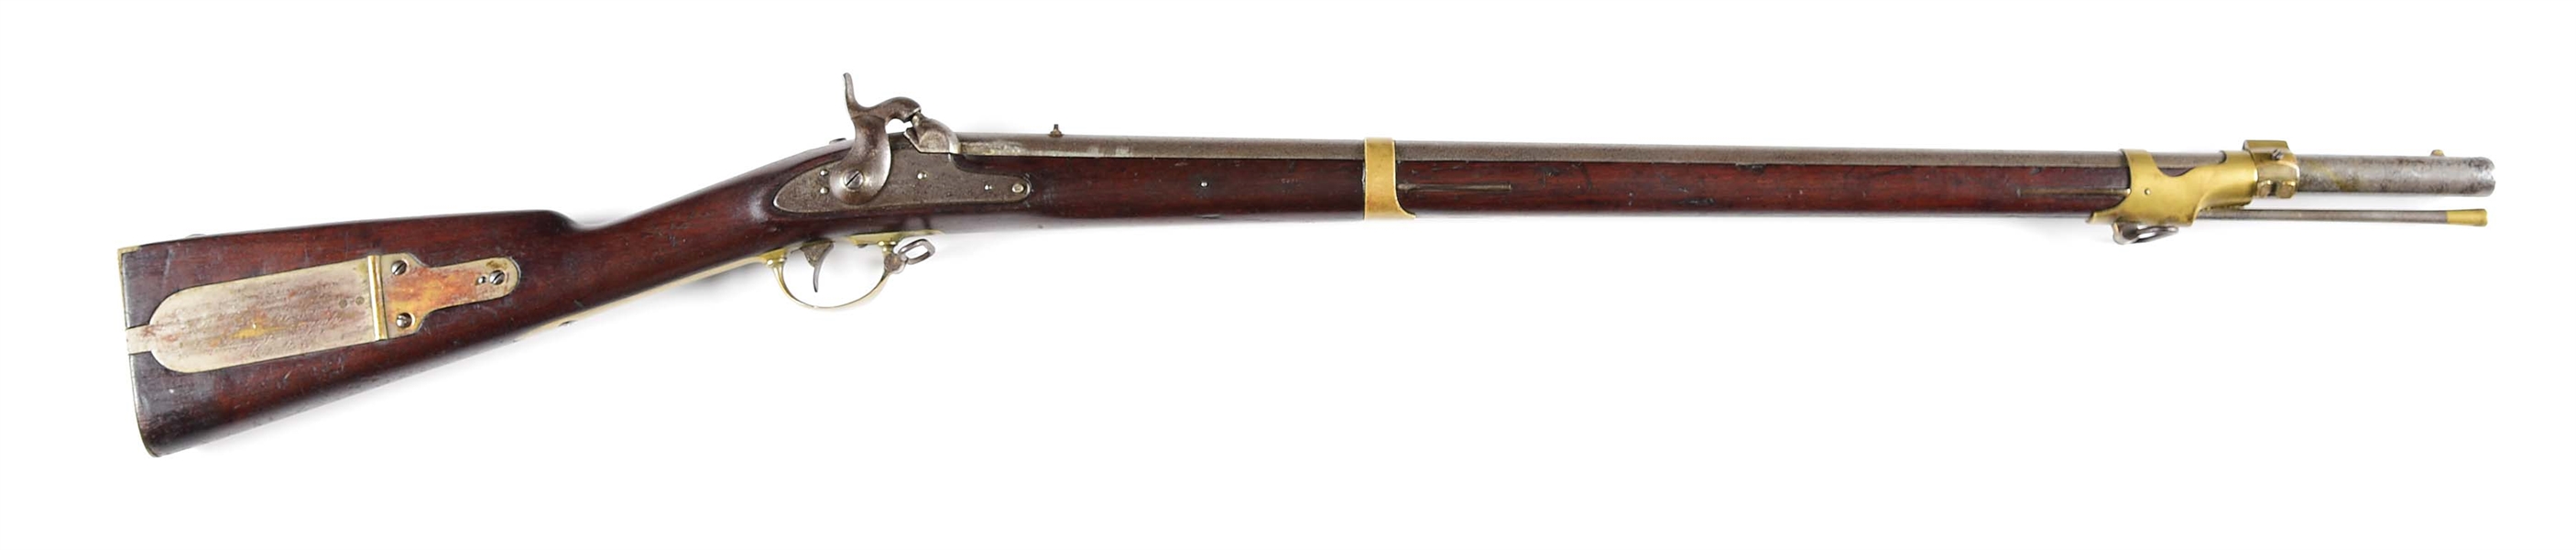 (A) WONDERFUL PRESENTATION CAPTURED CONFEDERATE USED ROBBINS & LAWRENCE 1841 "MISSISSIPPI" 1841 .54 CALIBER PERCUSSION RIFLE, WITH BG&M SWORD BAYONET ADAPTER RING.